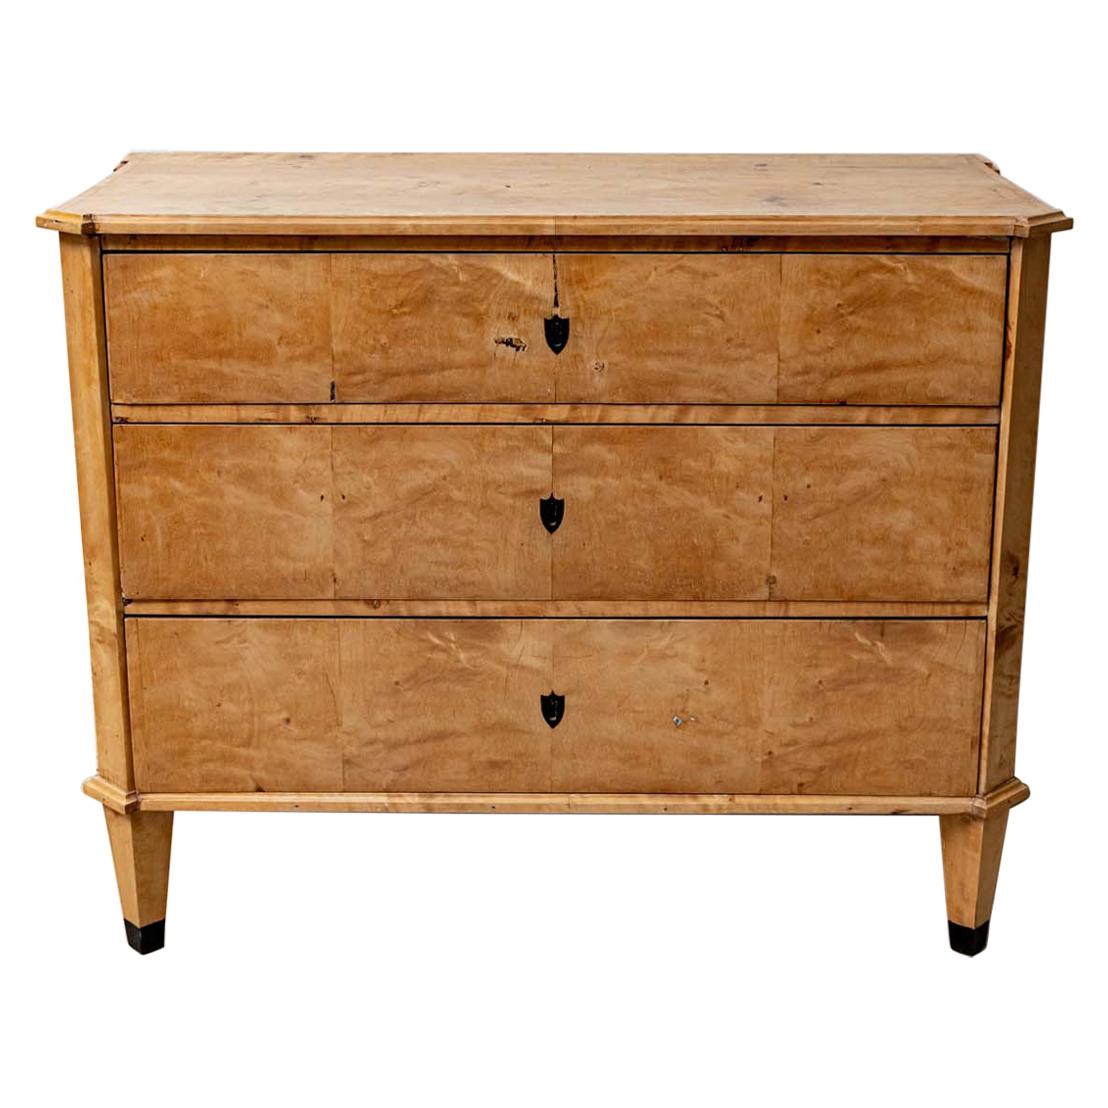 Late 19th Century Swedish Birch Three-Drawer Commode or Chest of Drawers